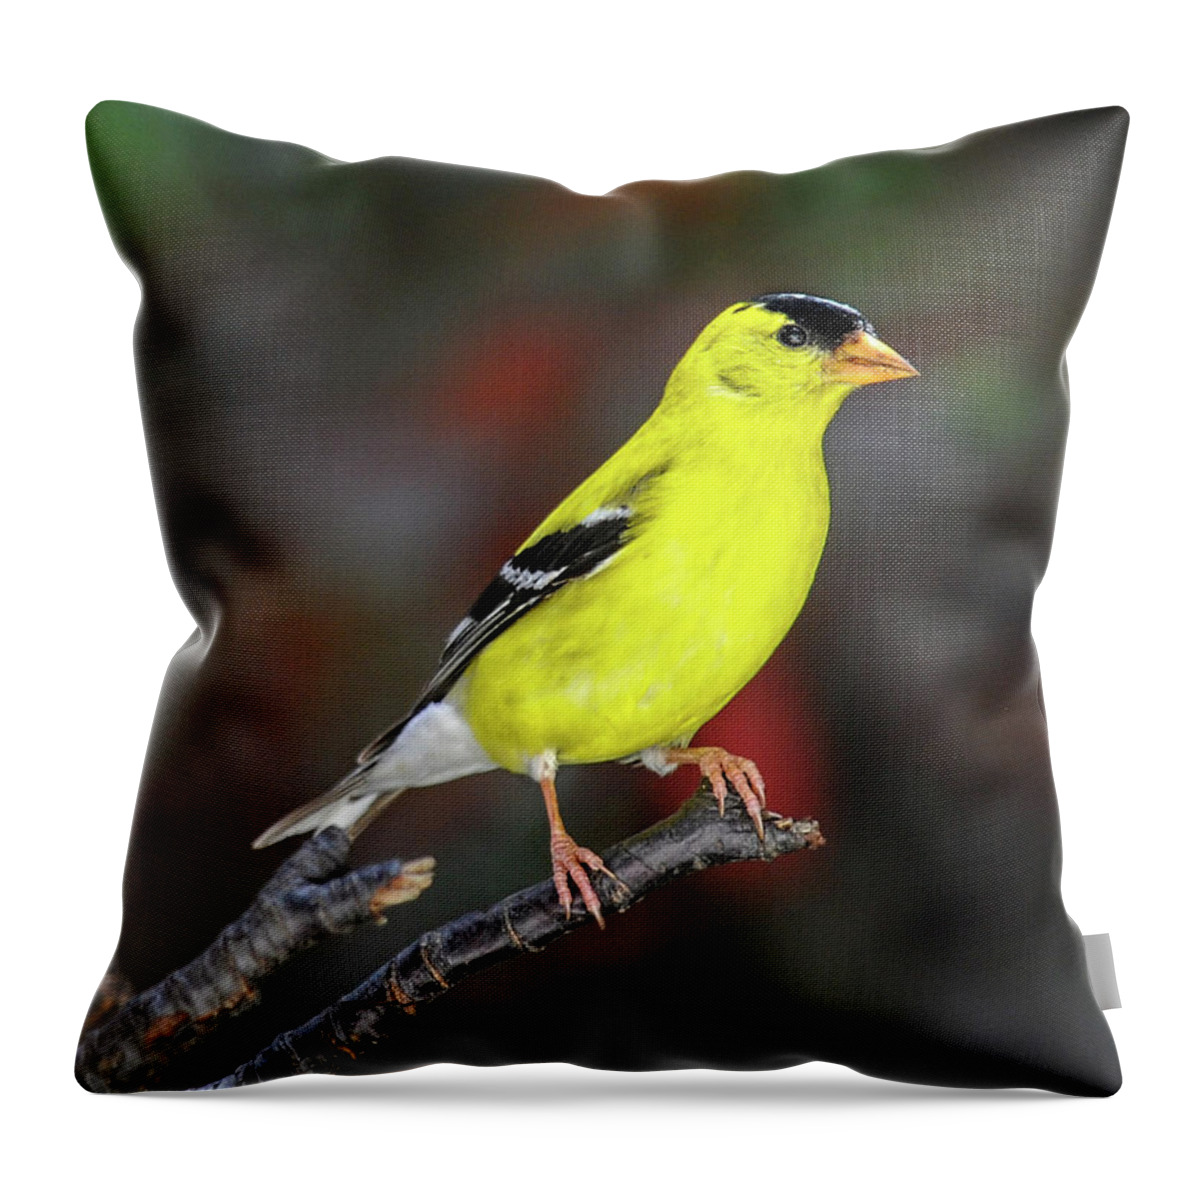 American Gold Finch Throw Pillow featuring the photograph Male American Gold Finch Profile by Lara Ellis